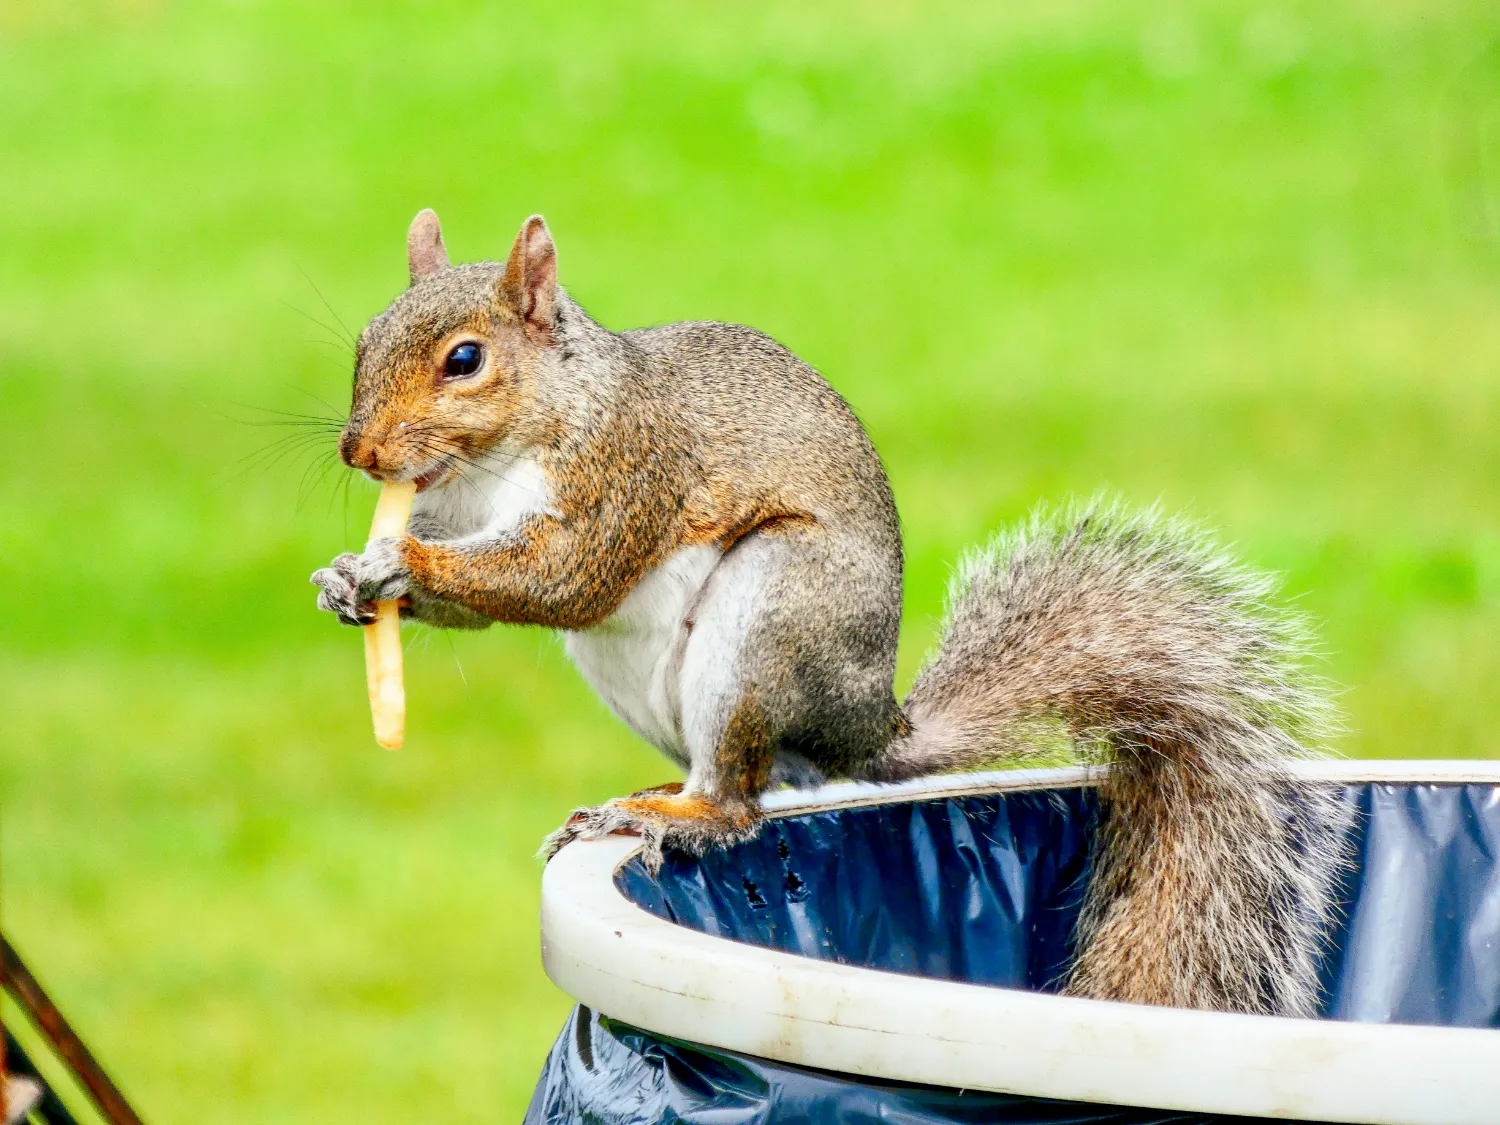 Squirrel eating a french fry